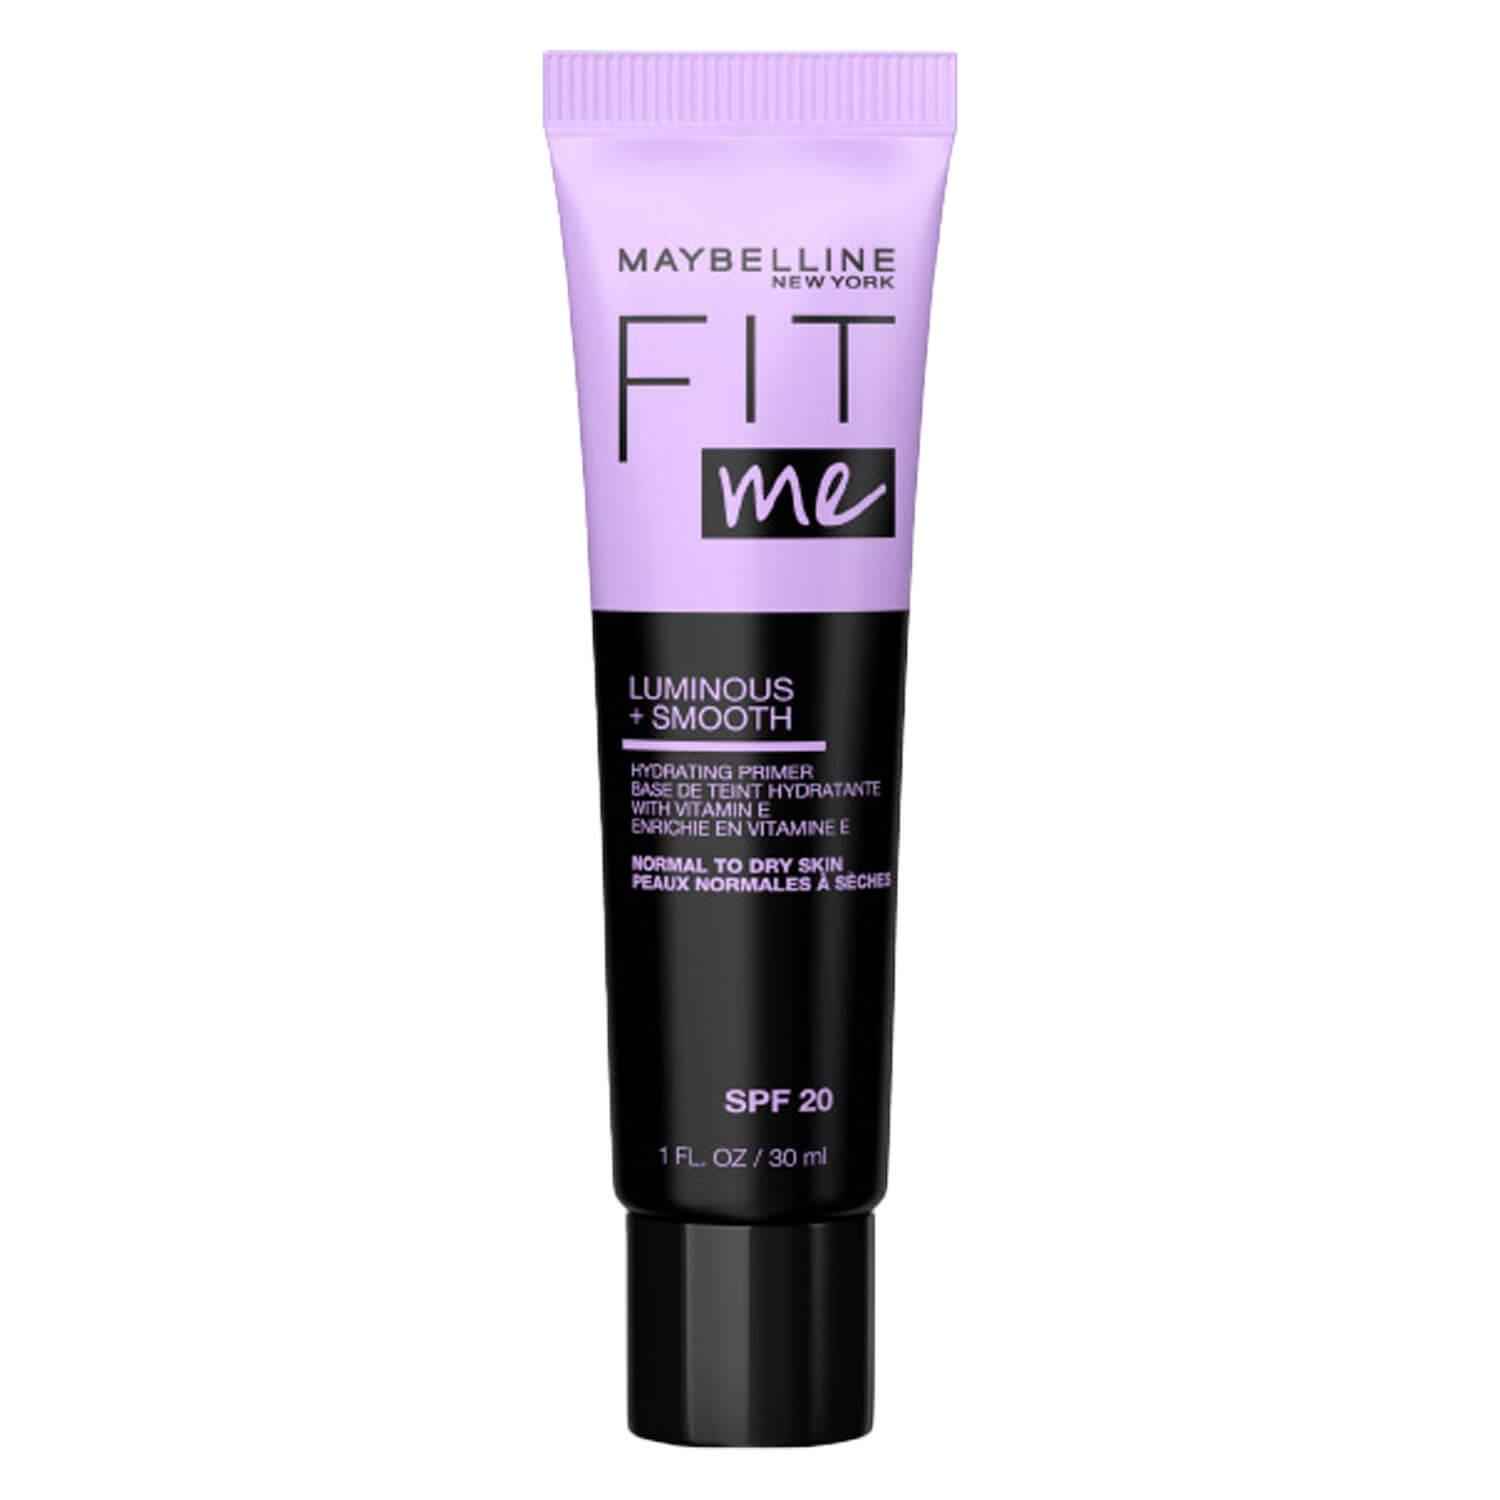 Maybelline NY Primer - Base de Maquillage Fit Me Primer Luminous & Smooth